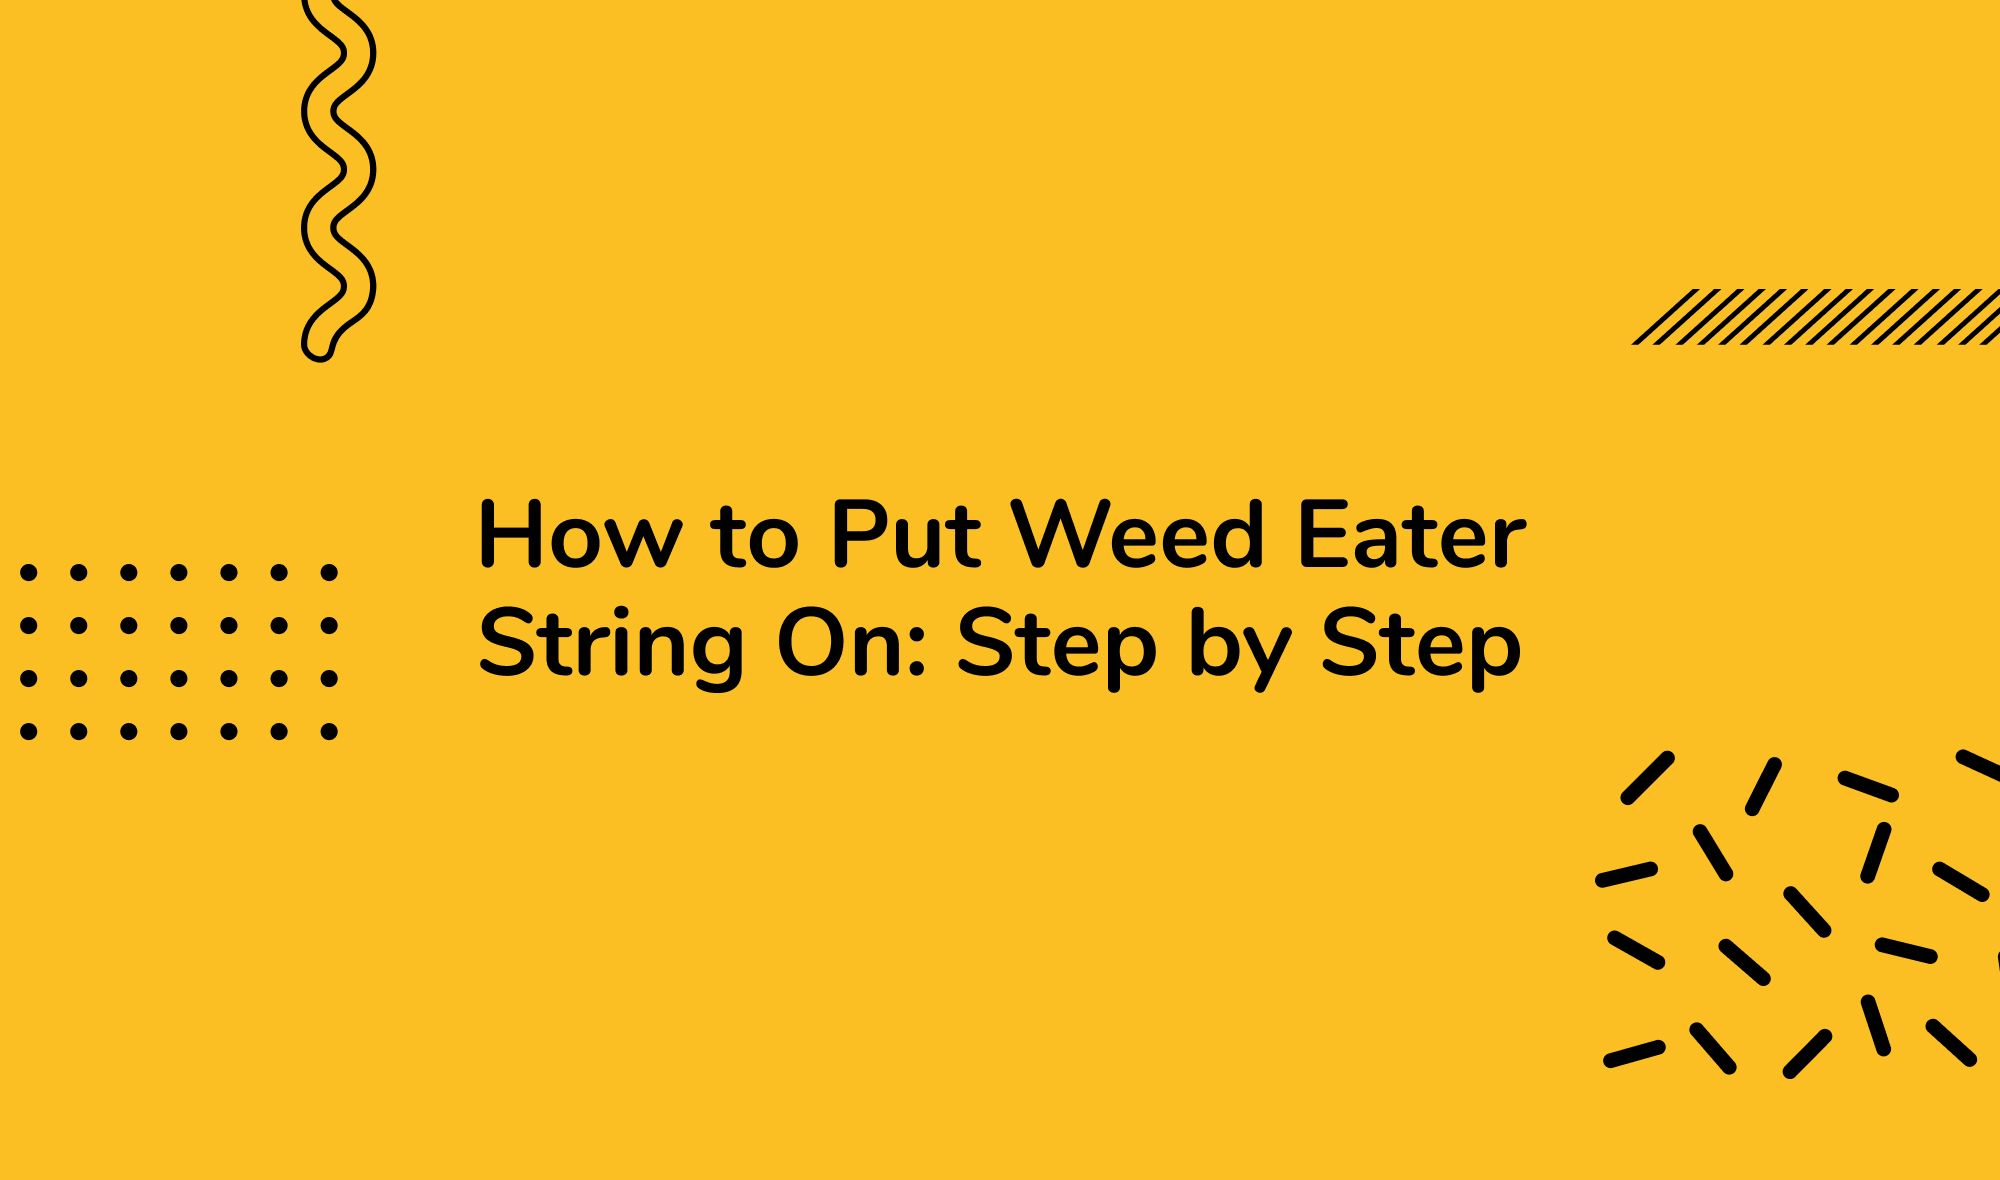 How to Put Weed Eater String On: Step by Step